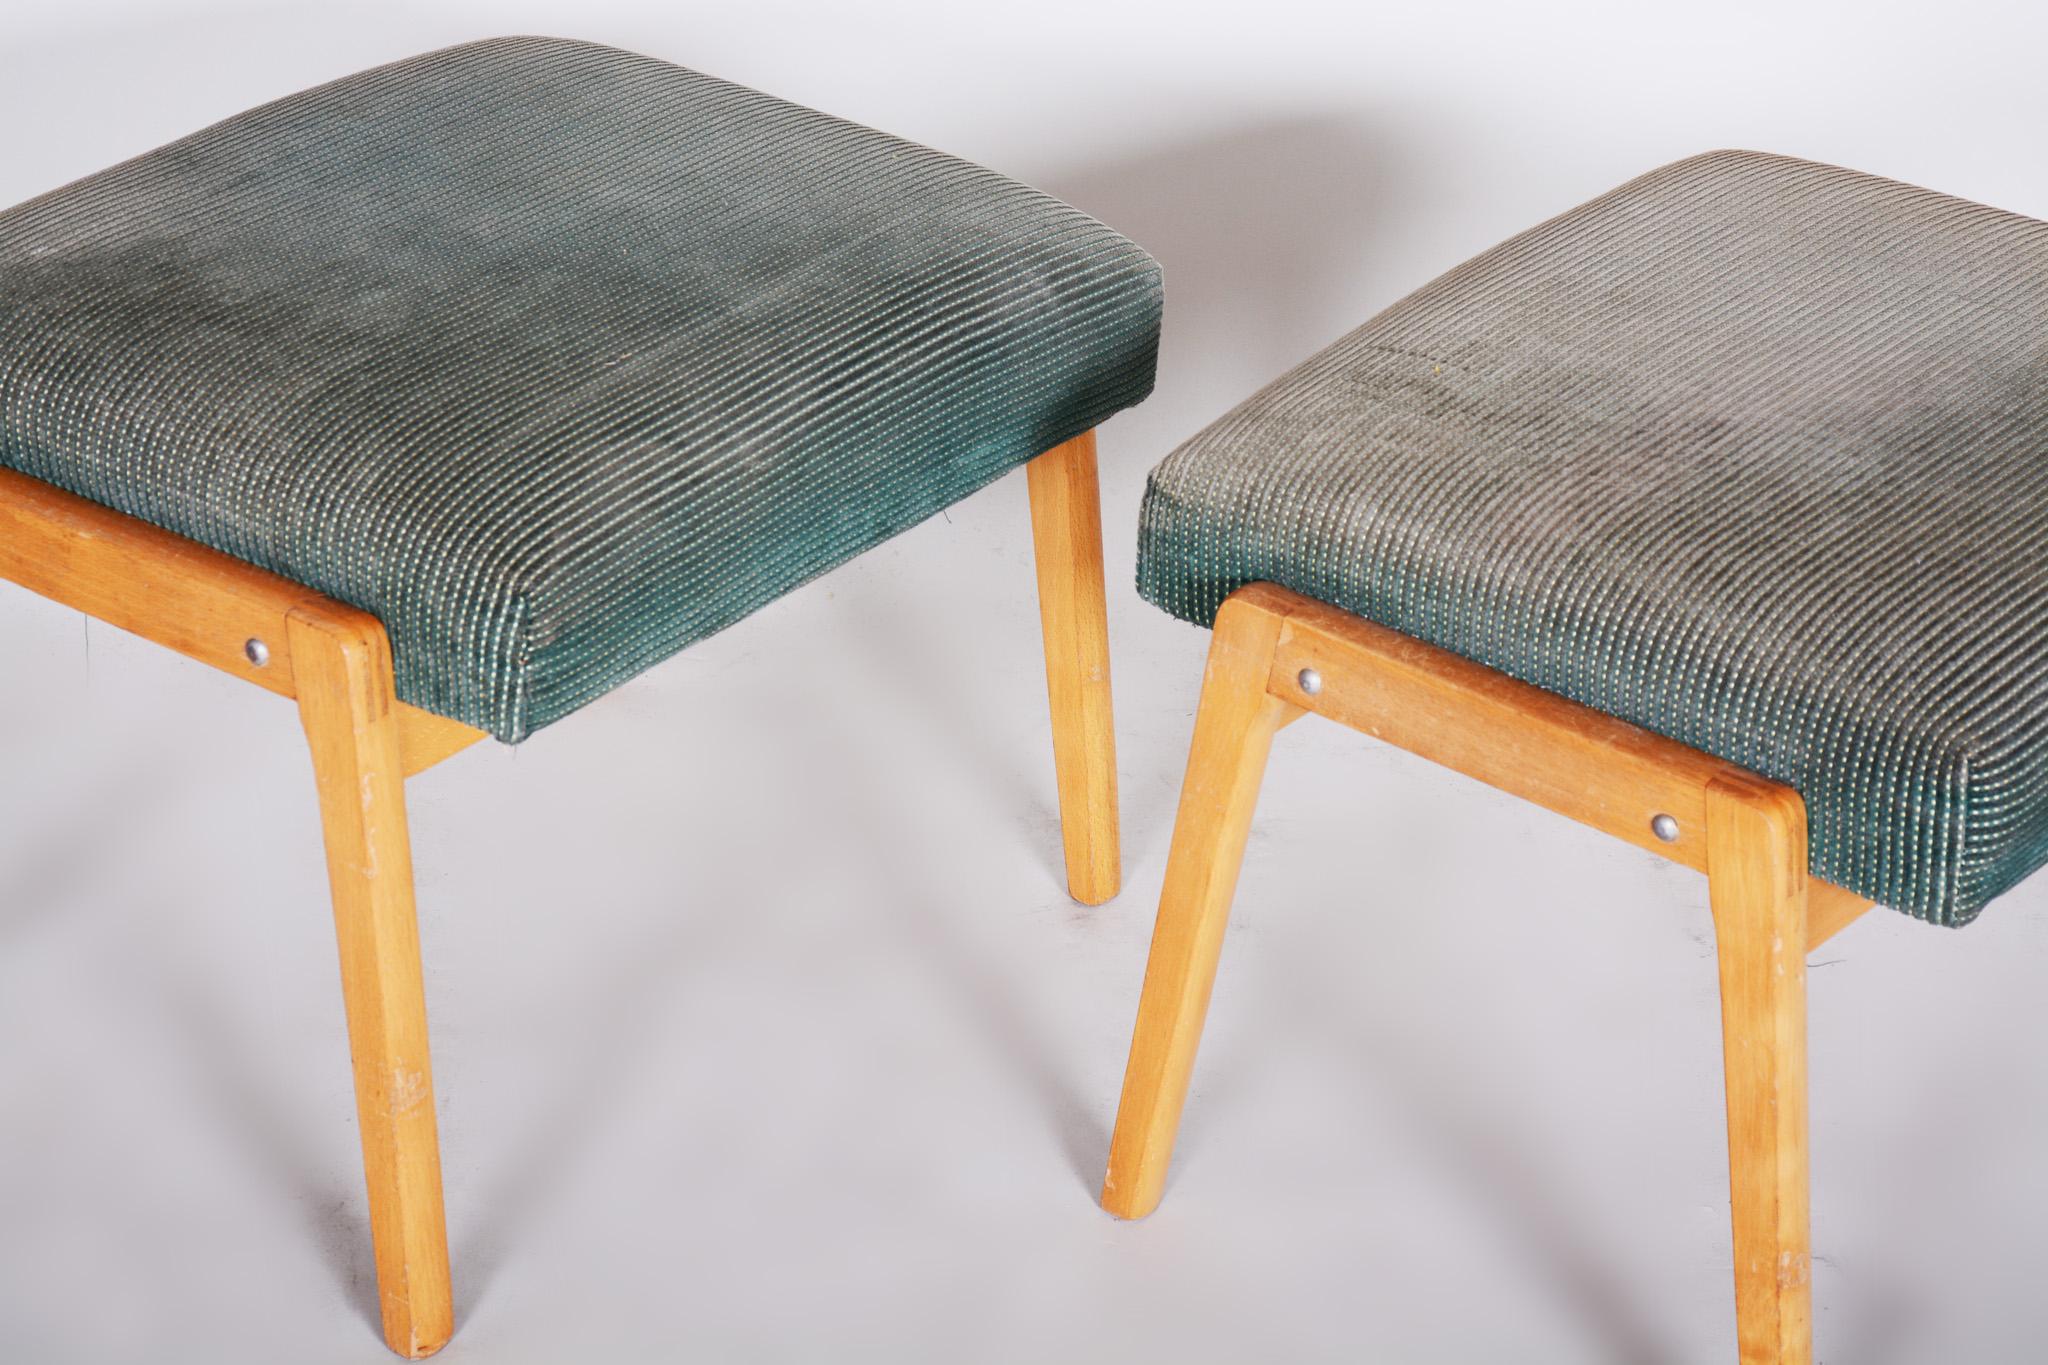 Czech Pair of Midcentury Green Beech Stools, 1960s, Original Preserved Condition